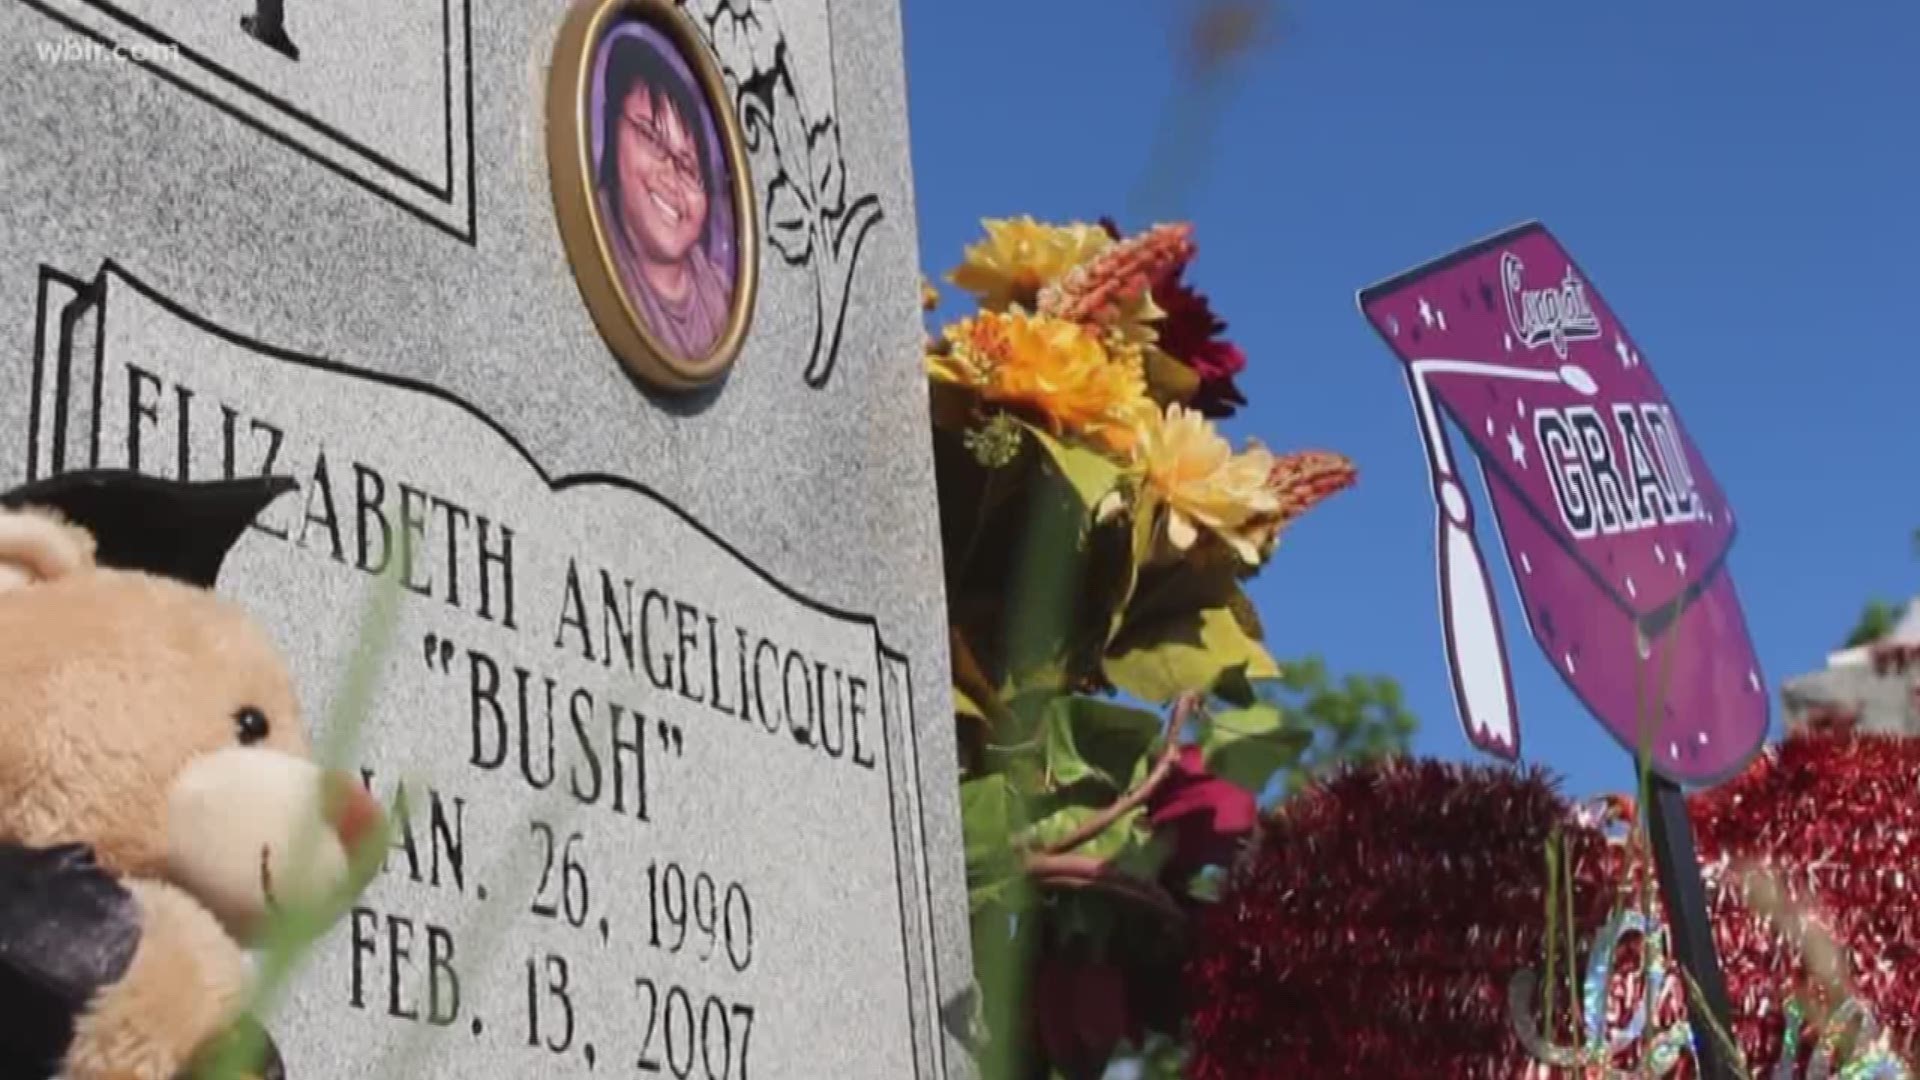 More than a decade after she was killed, a Knoxville mother is finally accepting her daughter's high school diploma. Friends and family celebrated graduation Tuesday at the grave site of Elizabeth Angelicque Bush